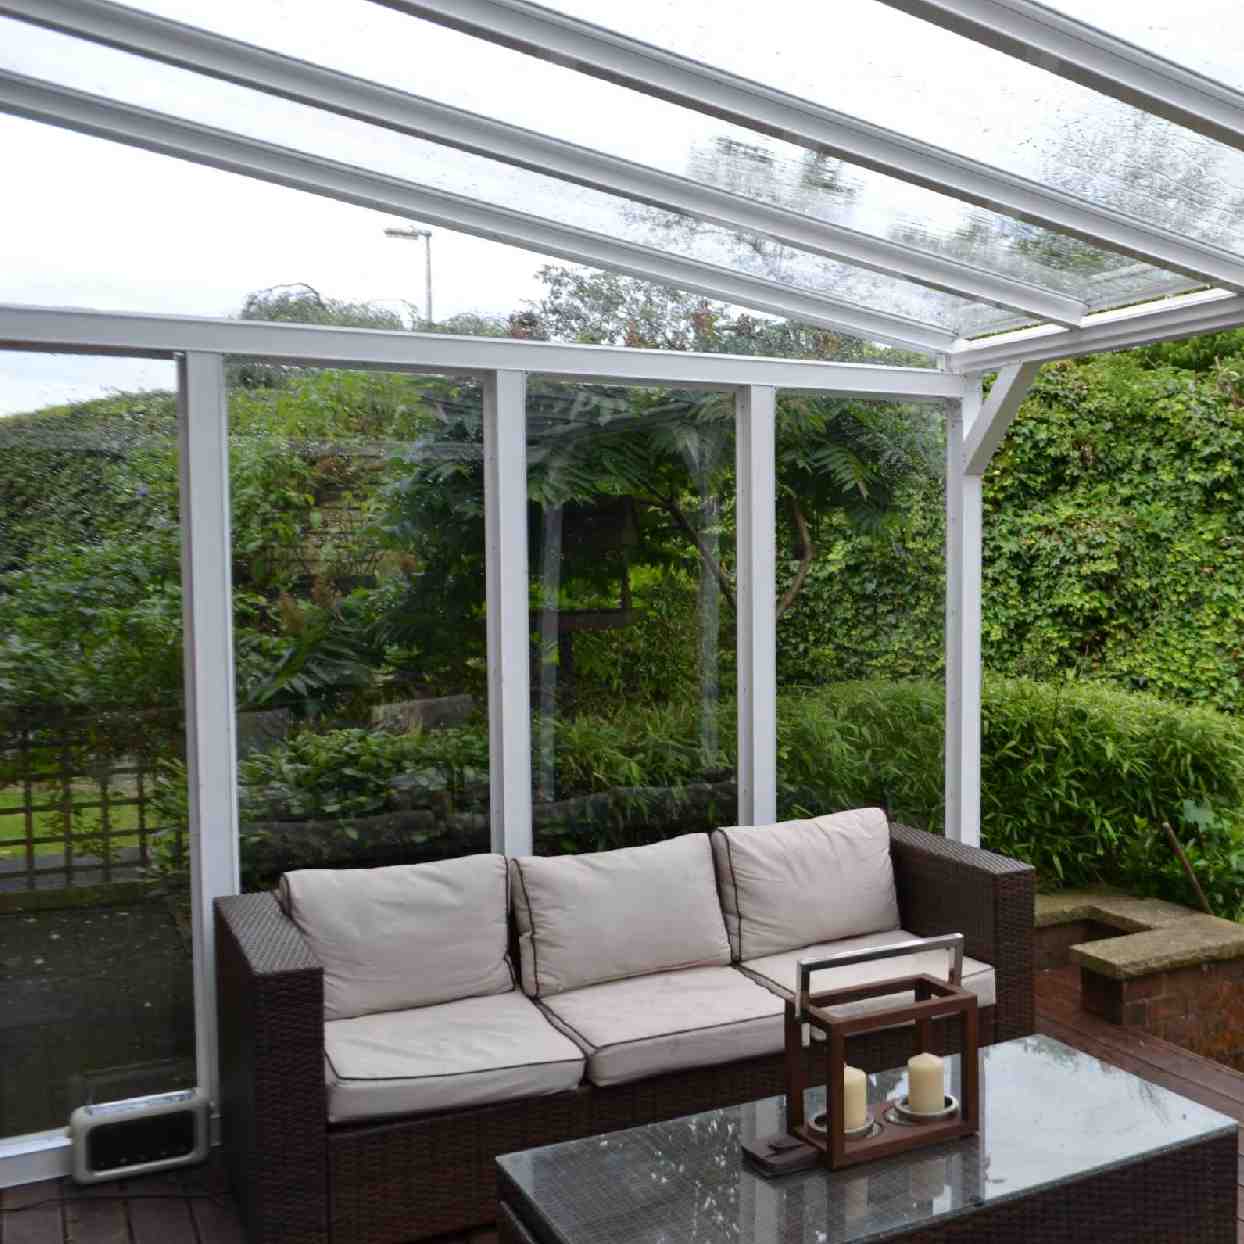 Buy Omega Verandah White with 16mm Polycarbonate Glazing - 5.9m (W) x 4.5m (P), (3) Supporting Posts online today